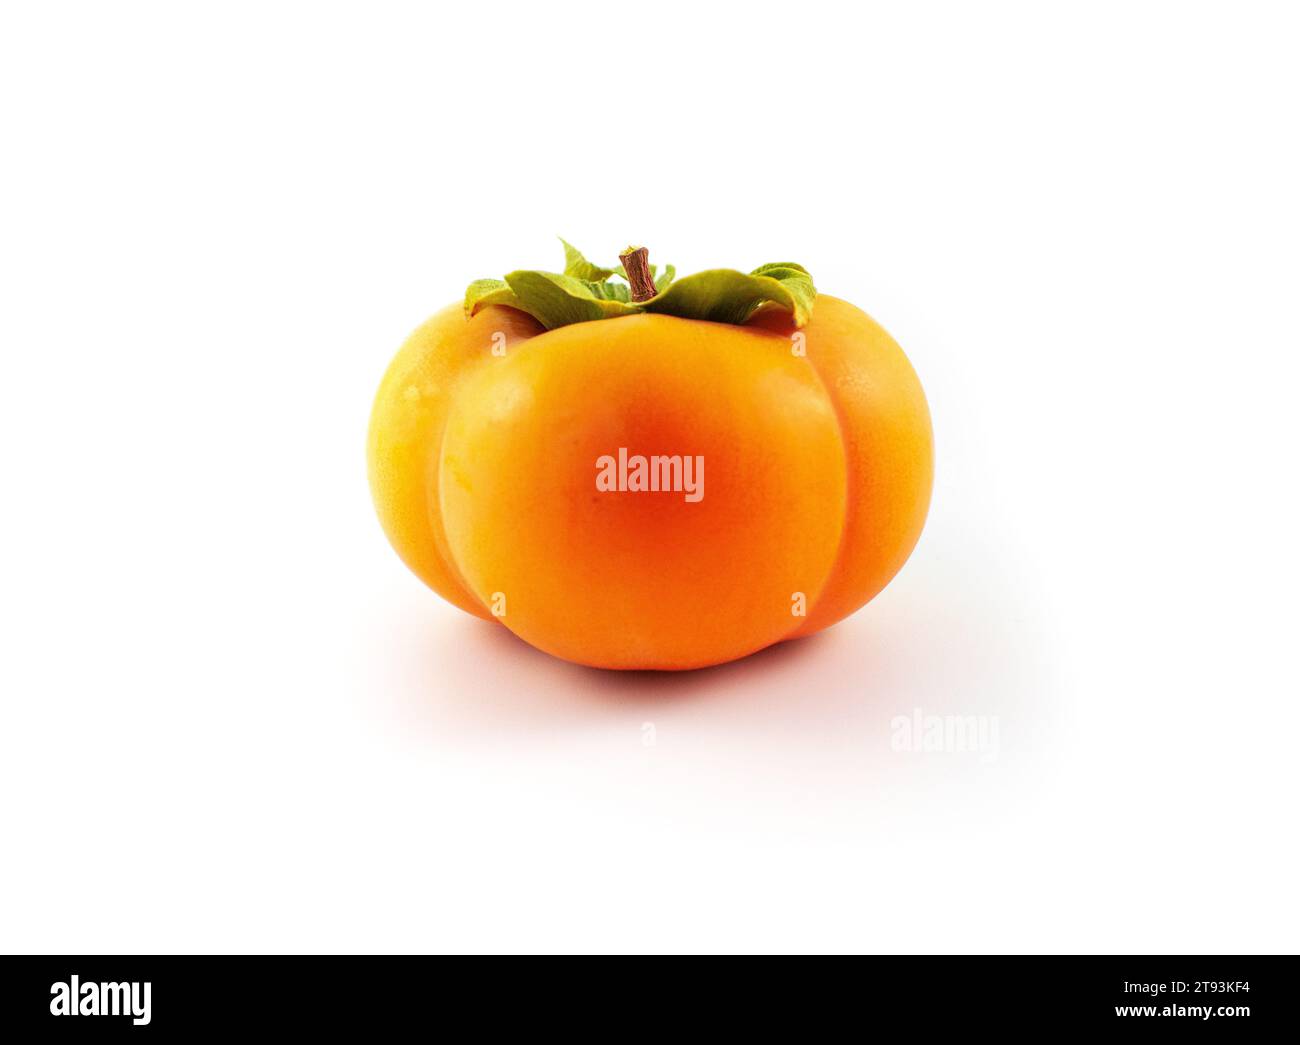 Photo of a ripe fuyu Asian persimmon with leaves and stem intact Stock Photo